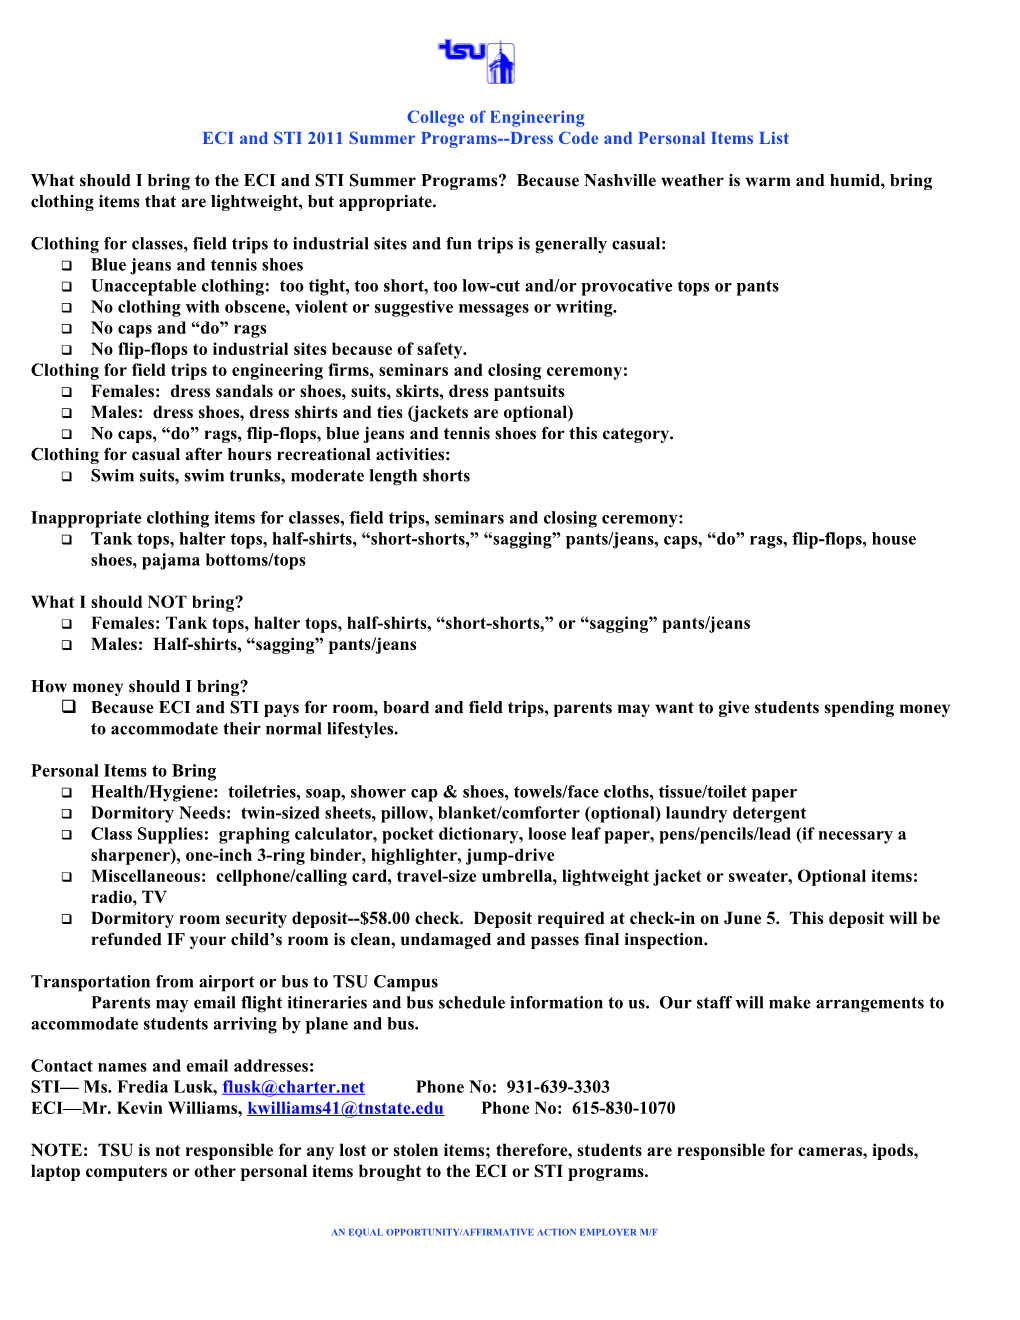 ECI and STI 2011 Summer Programs Dress Code and Personal Items List